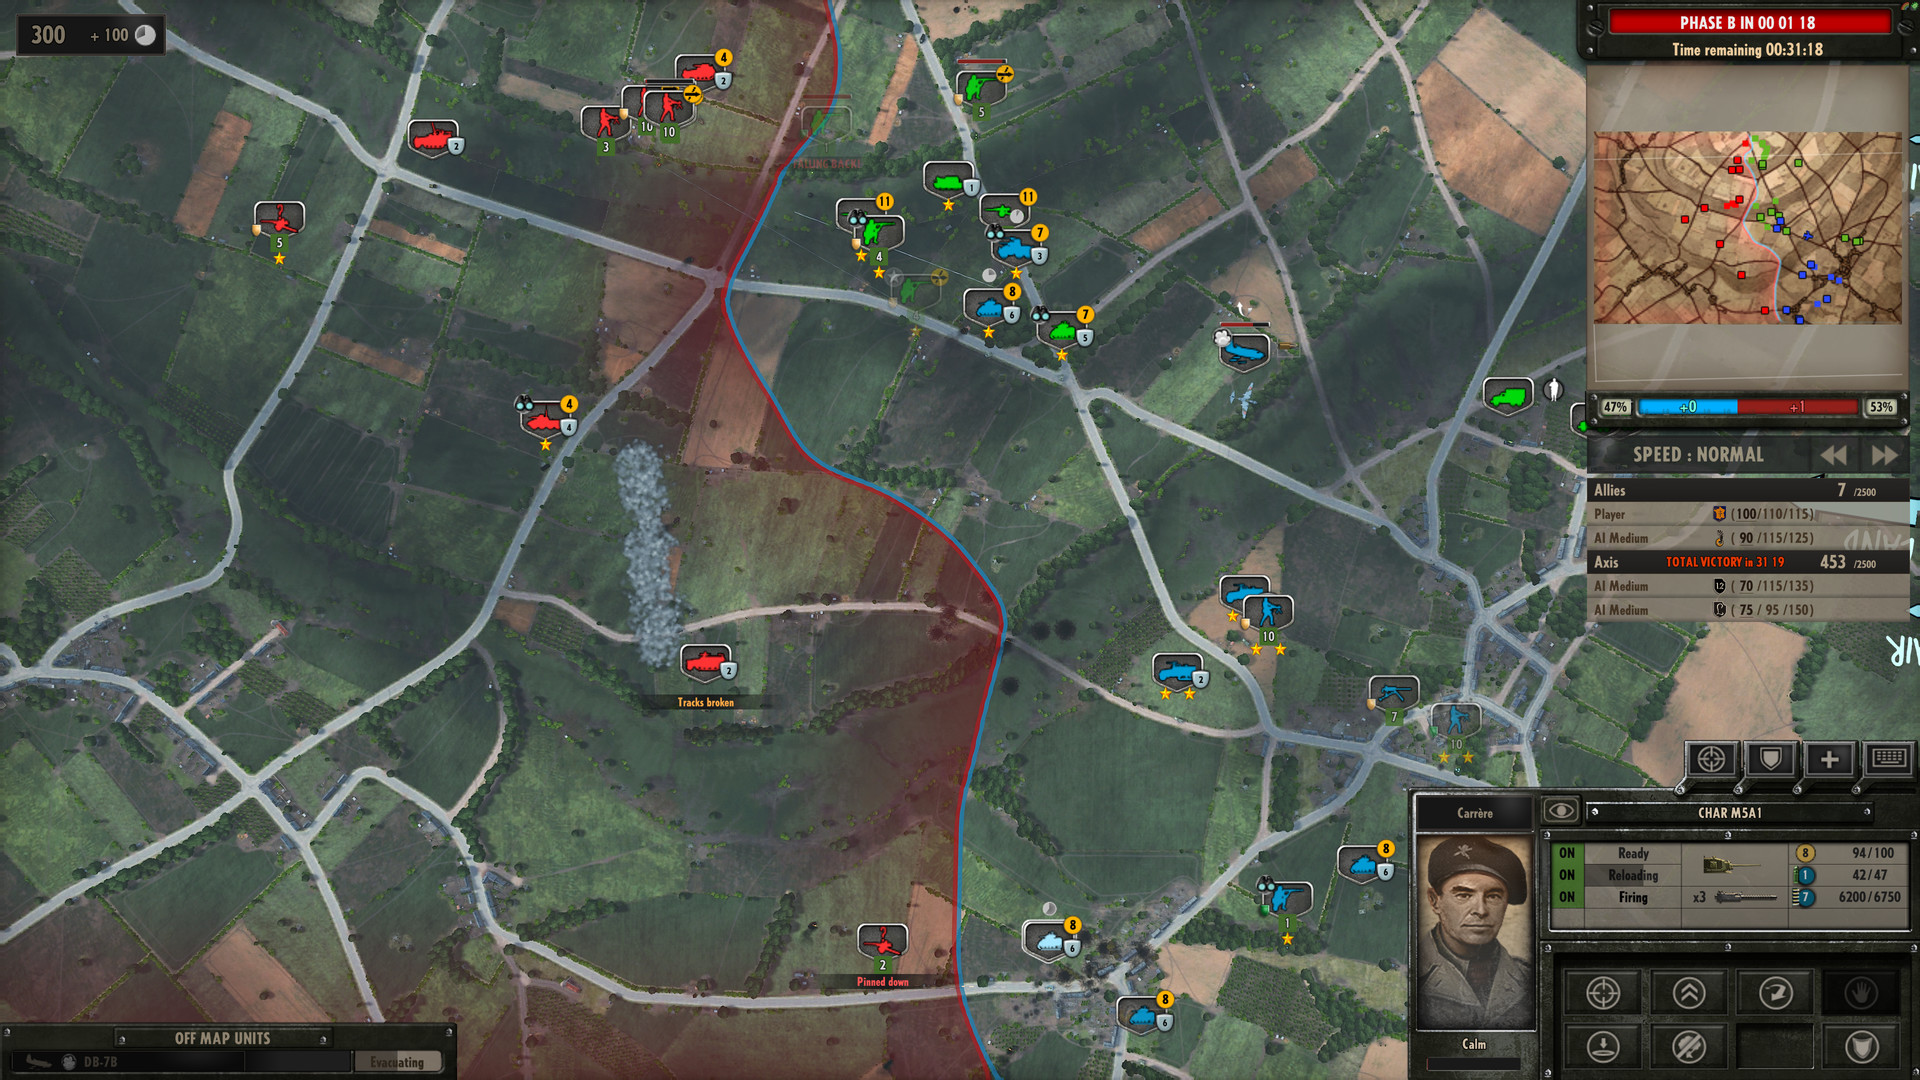 download steel division normandy 1944